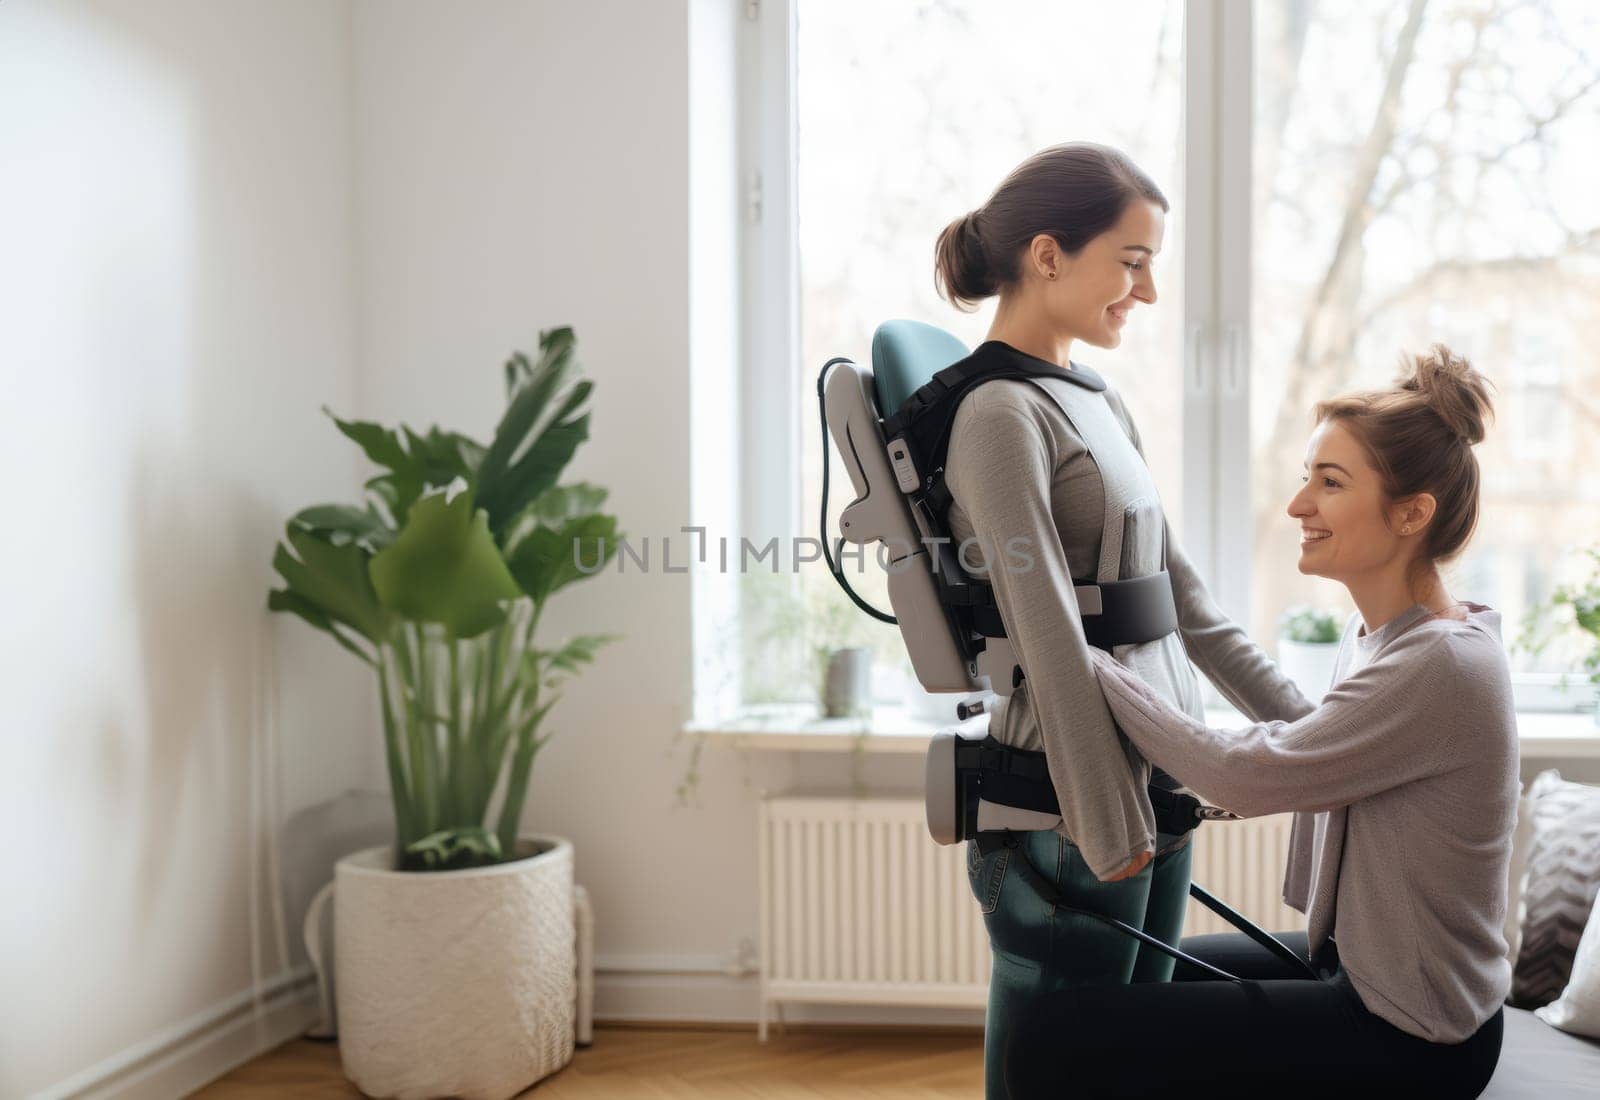 In a heartfelt scene, a doctor provides compassionate care during a home visit to a patient in a wheelchair, who is recovering from a broken neck, offering comfort and support in their journey towards healing